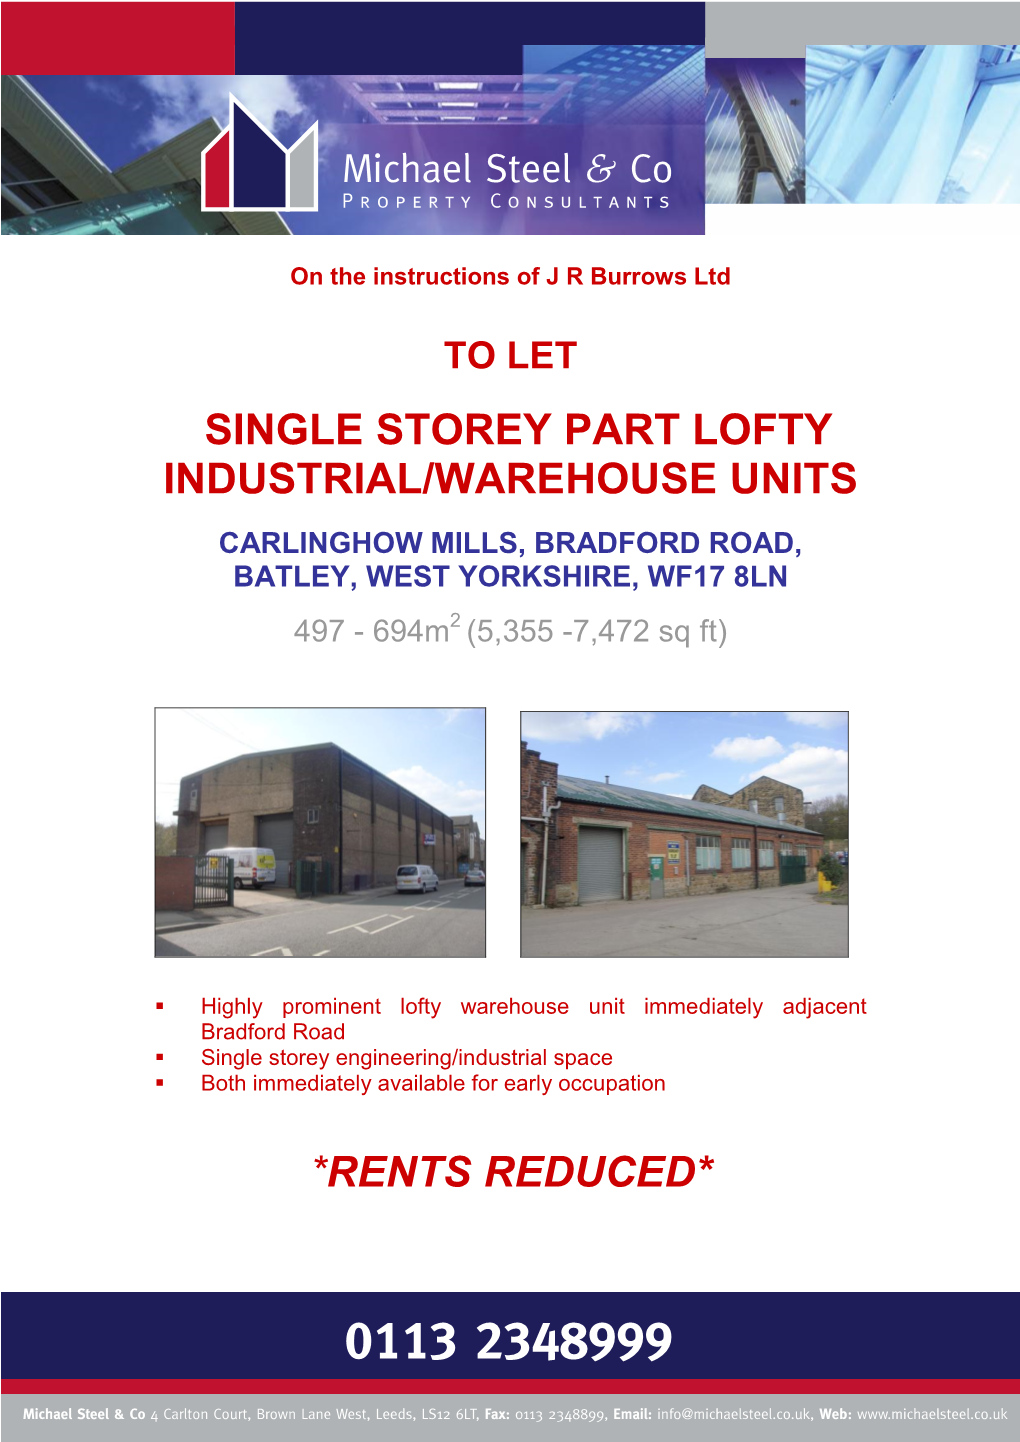 To Let Single Storey Part Lofty Industrial